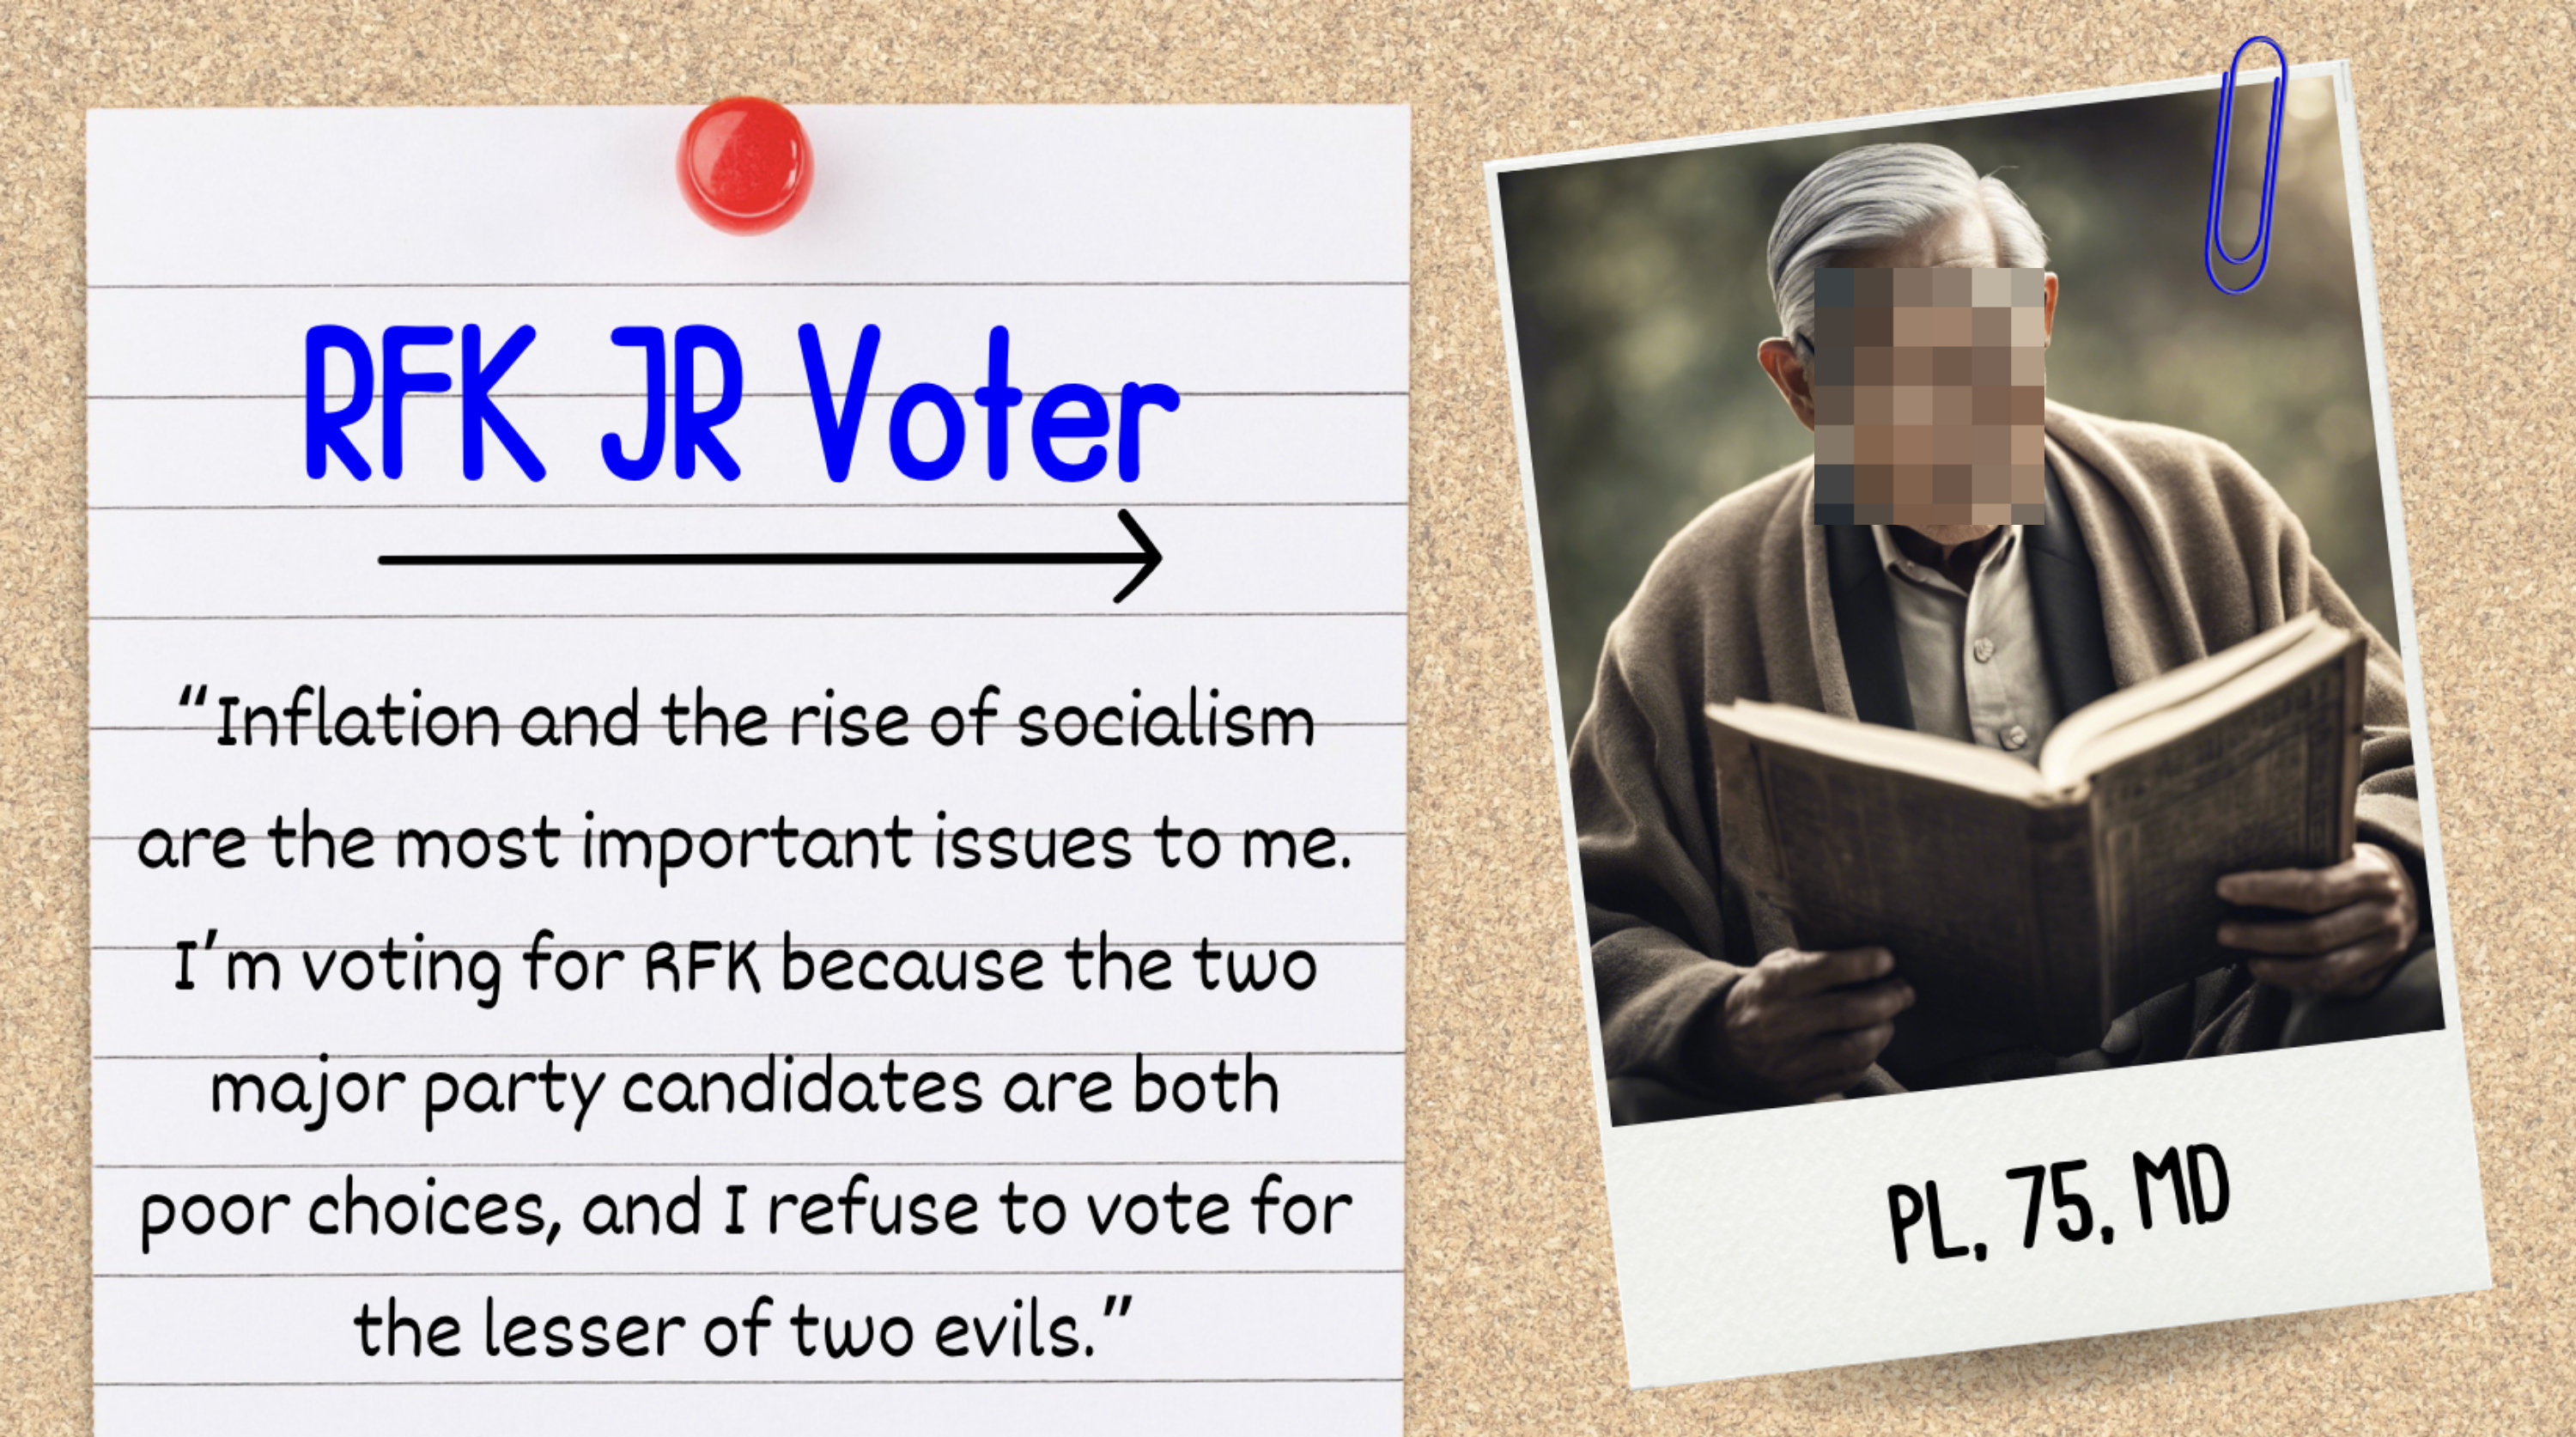 Elderly man reading a book with a voting sticker; quote on note expresses concerns about inflation and socialism, dissatisfaction with candidates